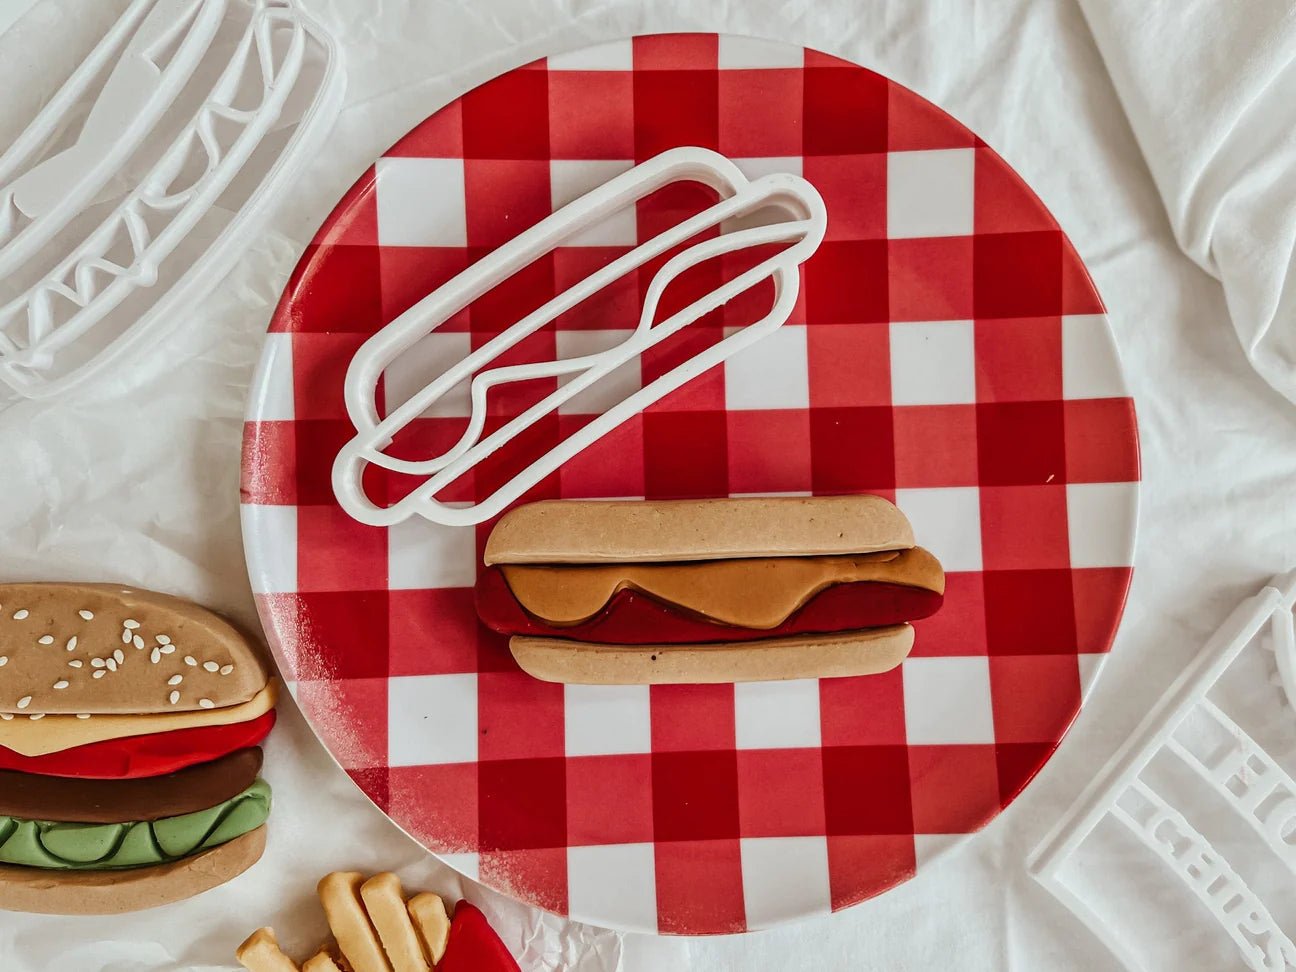 BEADIE BUG PLAY | HOT DOG BIO CUTTER by BEADIE BUG PLAY - The Playful Collective